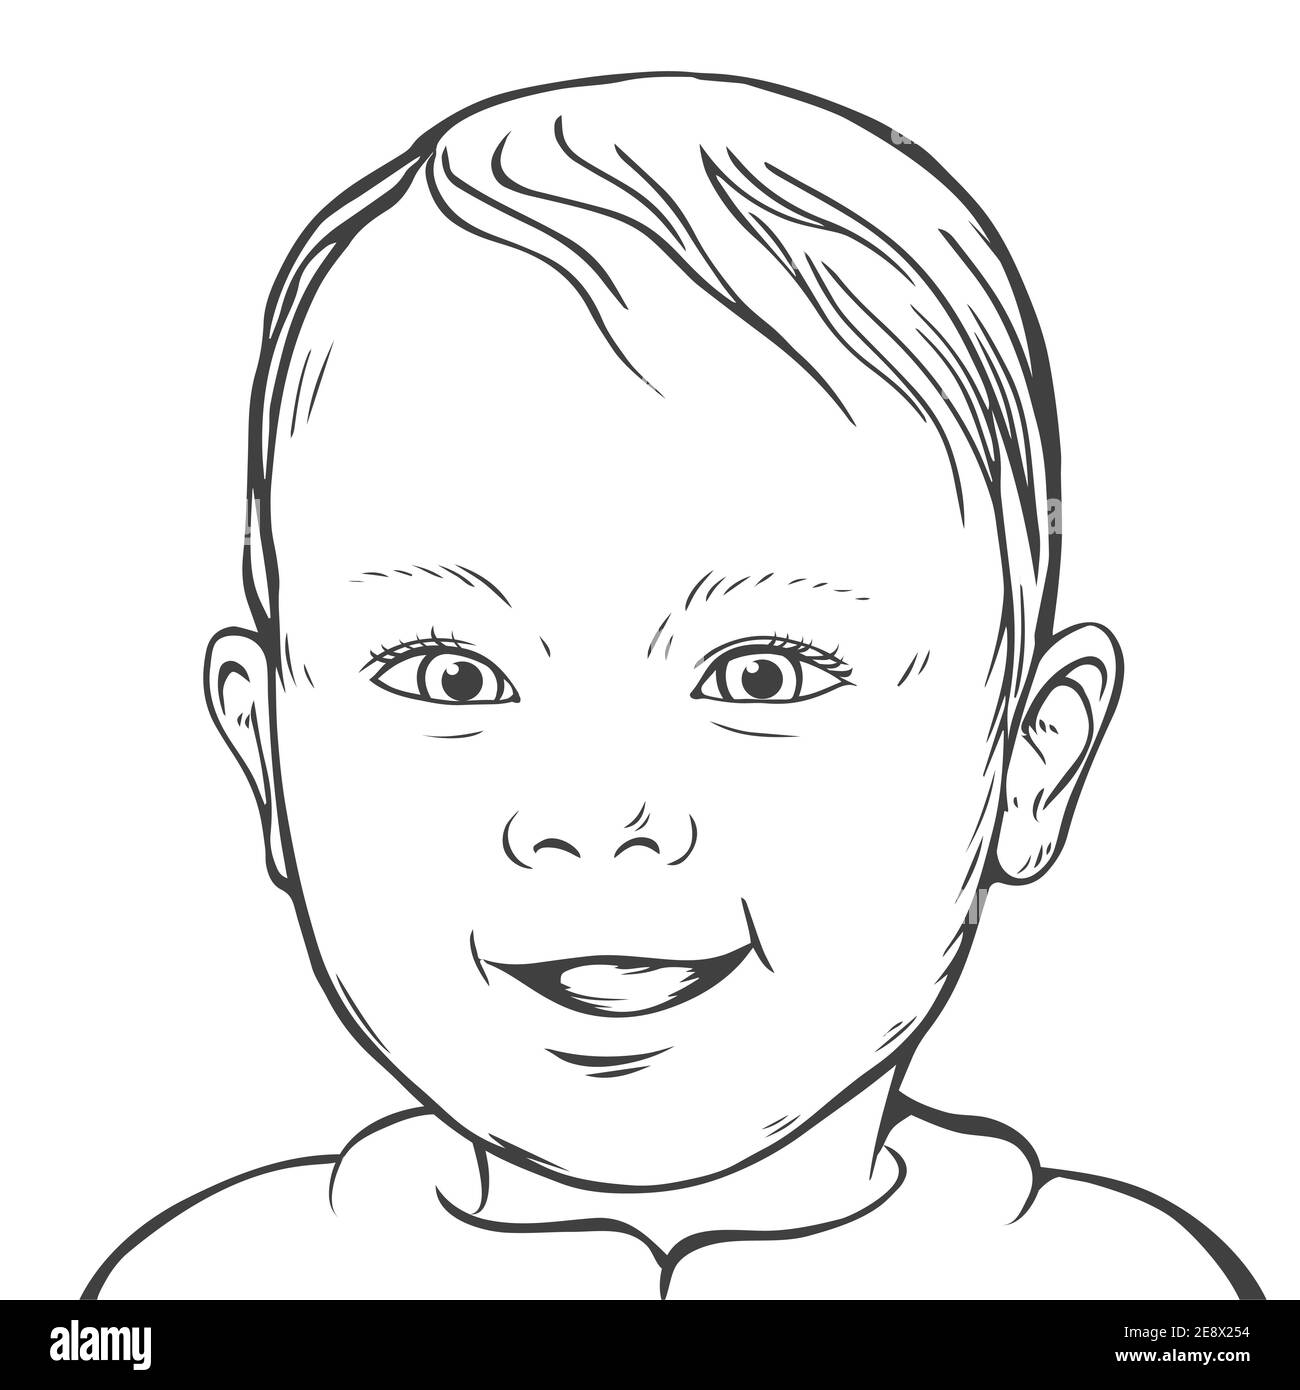 Baby Face Drawing Images  Free Download on Freepik